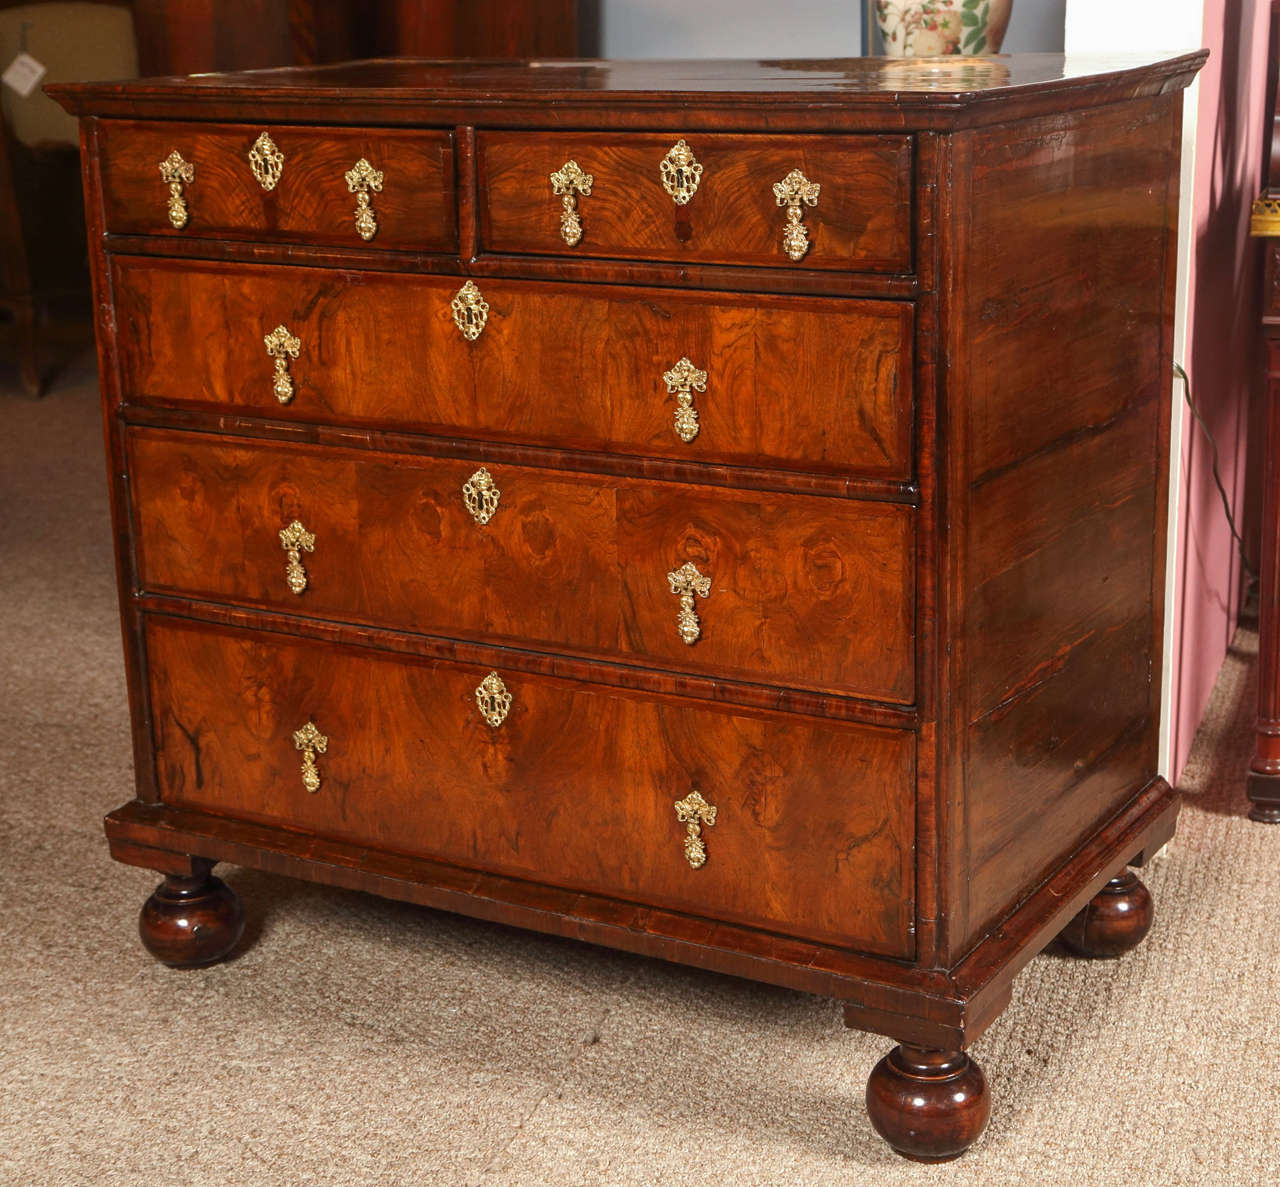 Finest example of a two over three drawer period William and Mary chest of drawers or commode. Fine walnut with oysters inlays. Appear to have either the original feet or perhaps replace very early on. In incredible fine condition having recently